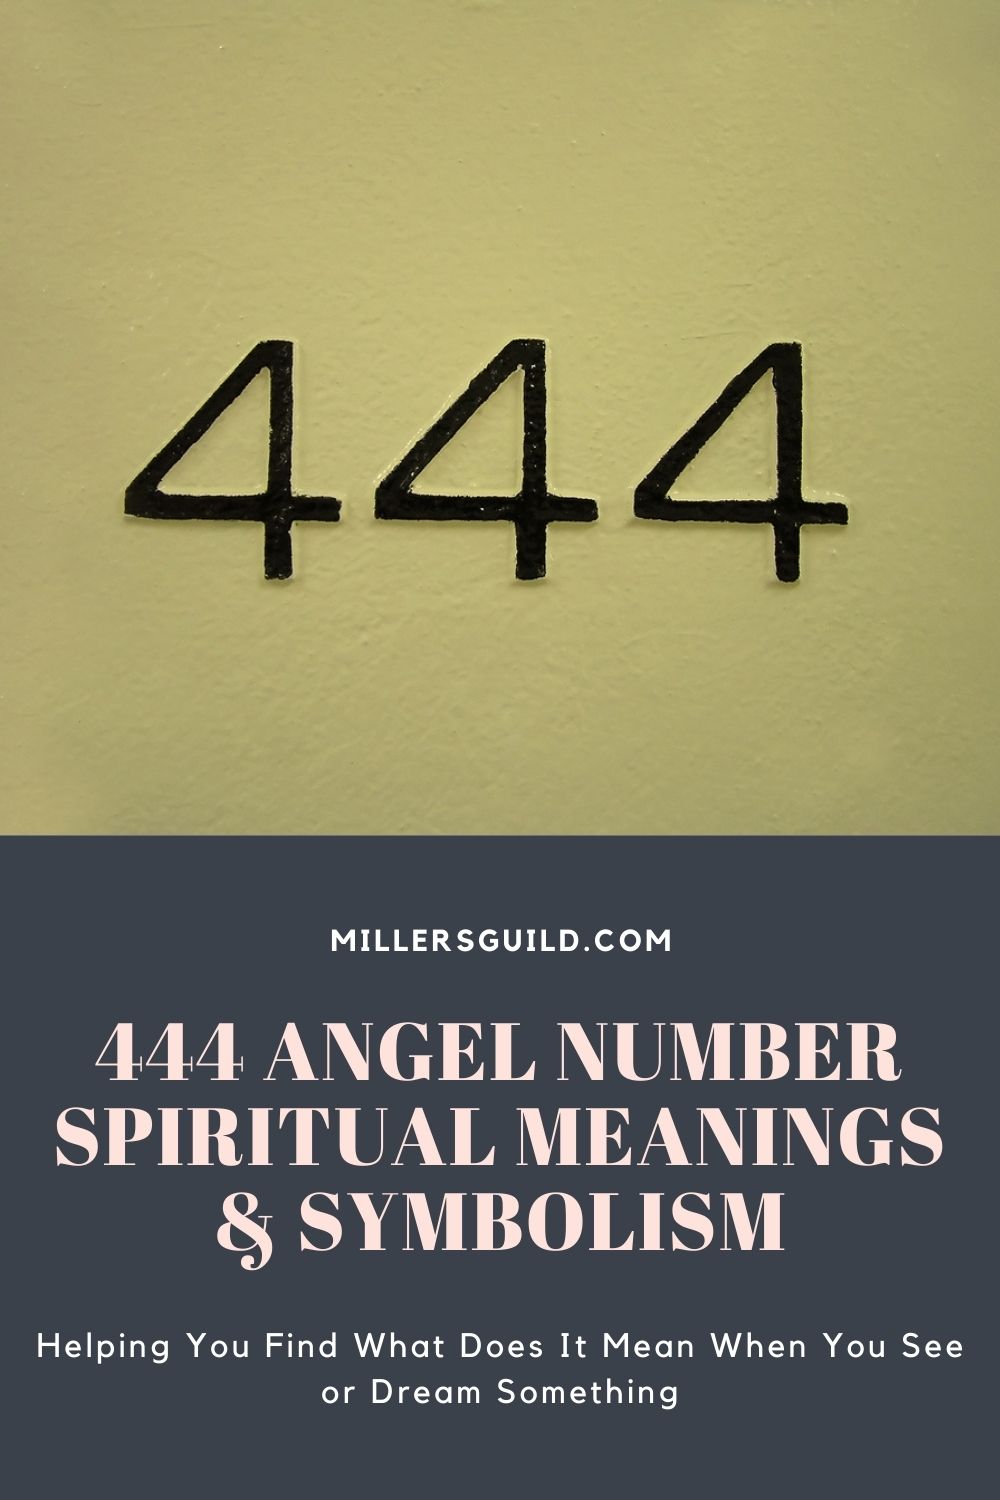 444 Angel Number Spiritual Meanings & Symbolism 2